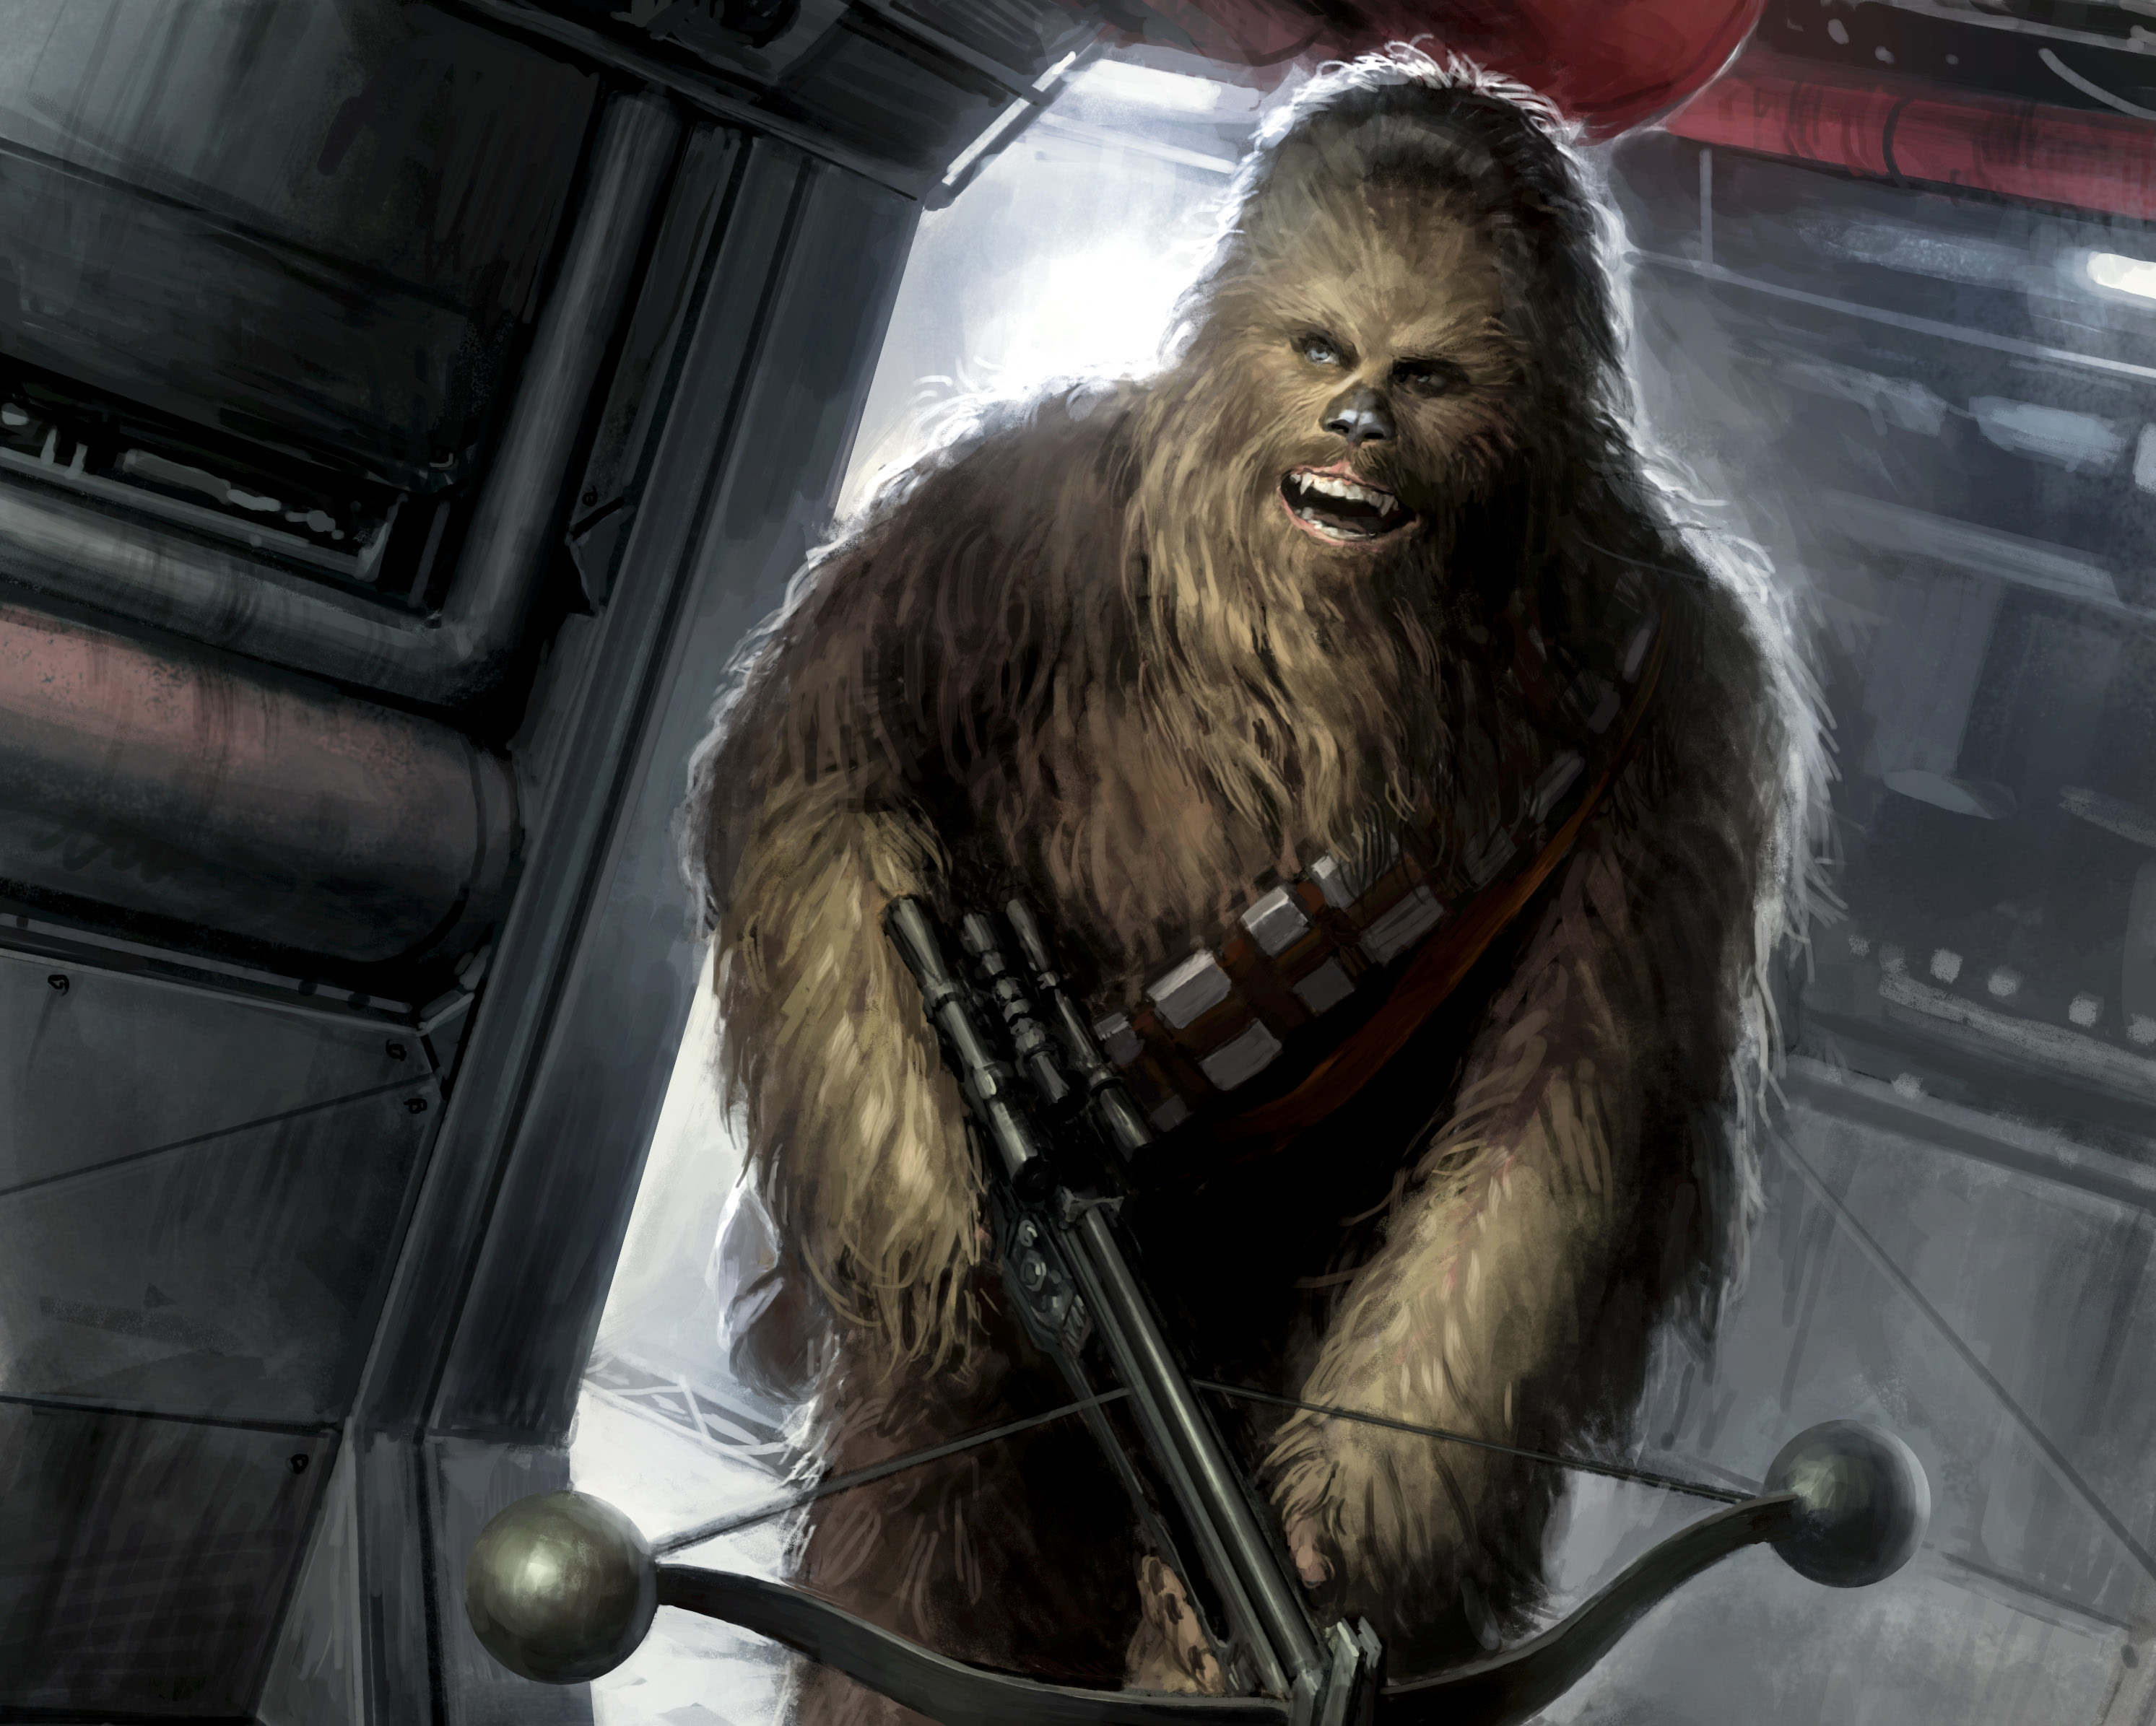 Chewbacca was captured by Trandoshan trophy hunters in the second year of the clone wars, but alongside Jedi Padawan Ahsoka Tano, and two Jedi Younglings, they defeated their captors and contacted the Wookie's to make an emergency rescue. Chewbacca then played a key role in the Clone Wars as he was already a highly respected warrior and navigator of his people. He helped in organizing and deploying Clone soldiers across Kashyyyk knowing all the weakest points and best defensive areas. He personally assisted Jedi Knight Quinlan Vos in the Great Kashyyyk assault. After Order 66 had been issued, Chewbacca and General Tarfful helpled Yoda escape the planet.